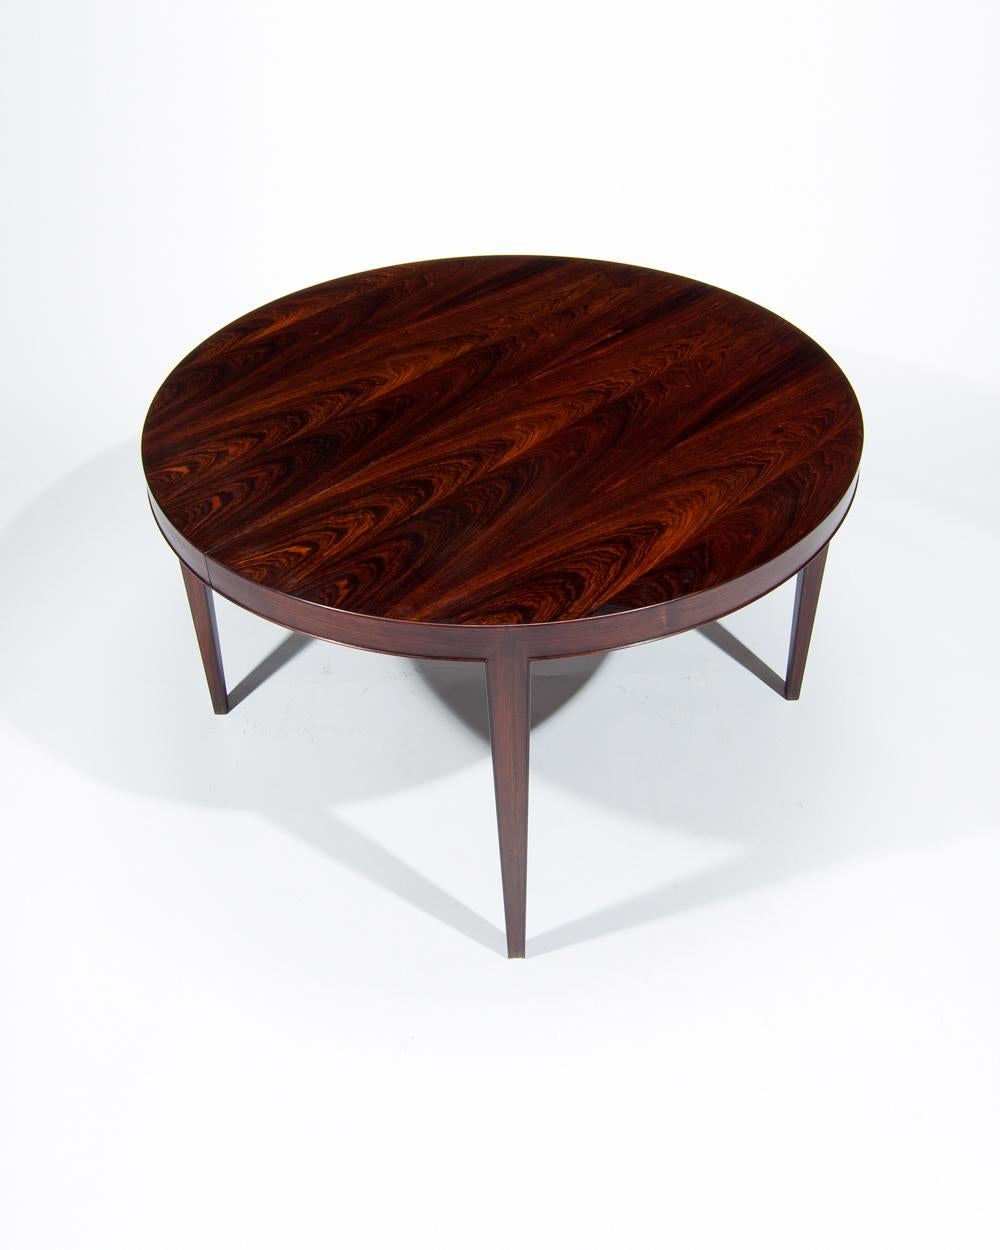 Mid-Century Modern Danish Rosewood Dining Table by Severin Hansen, Midcentury Design, 1960s For Sale